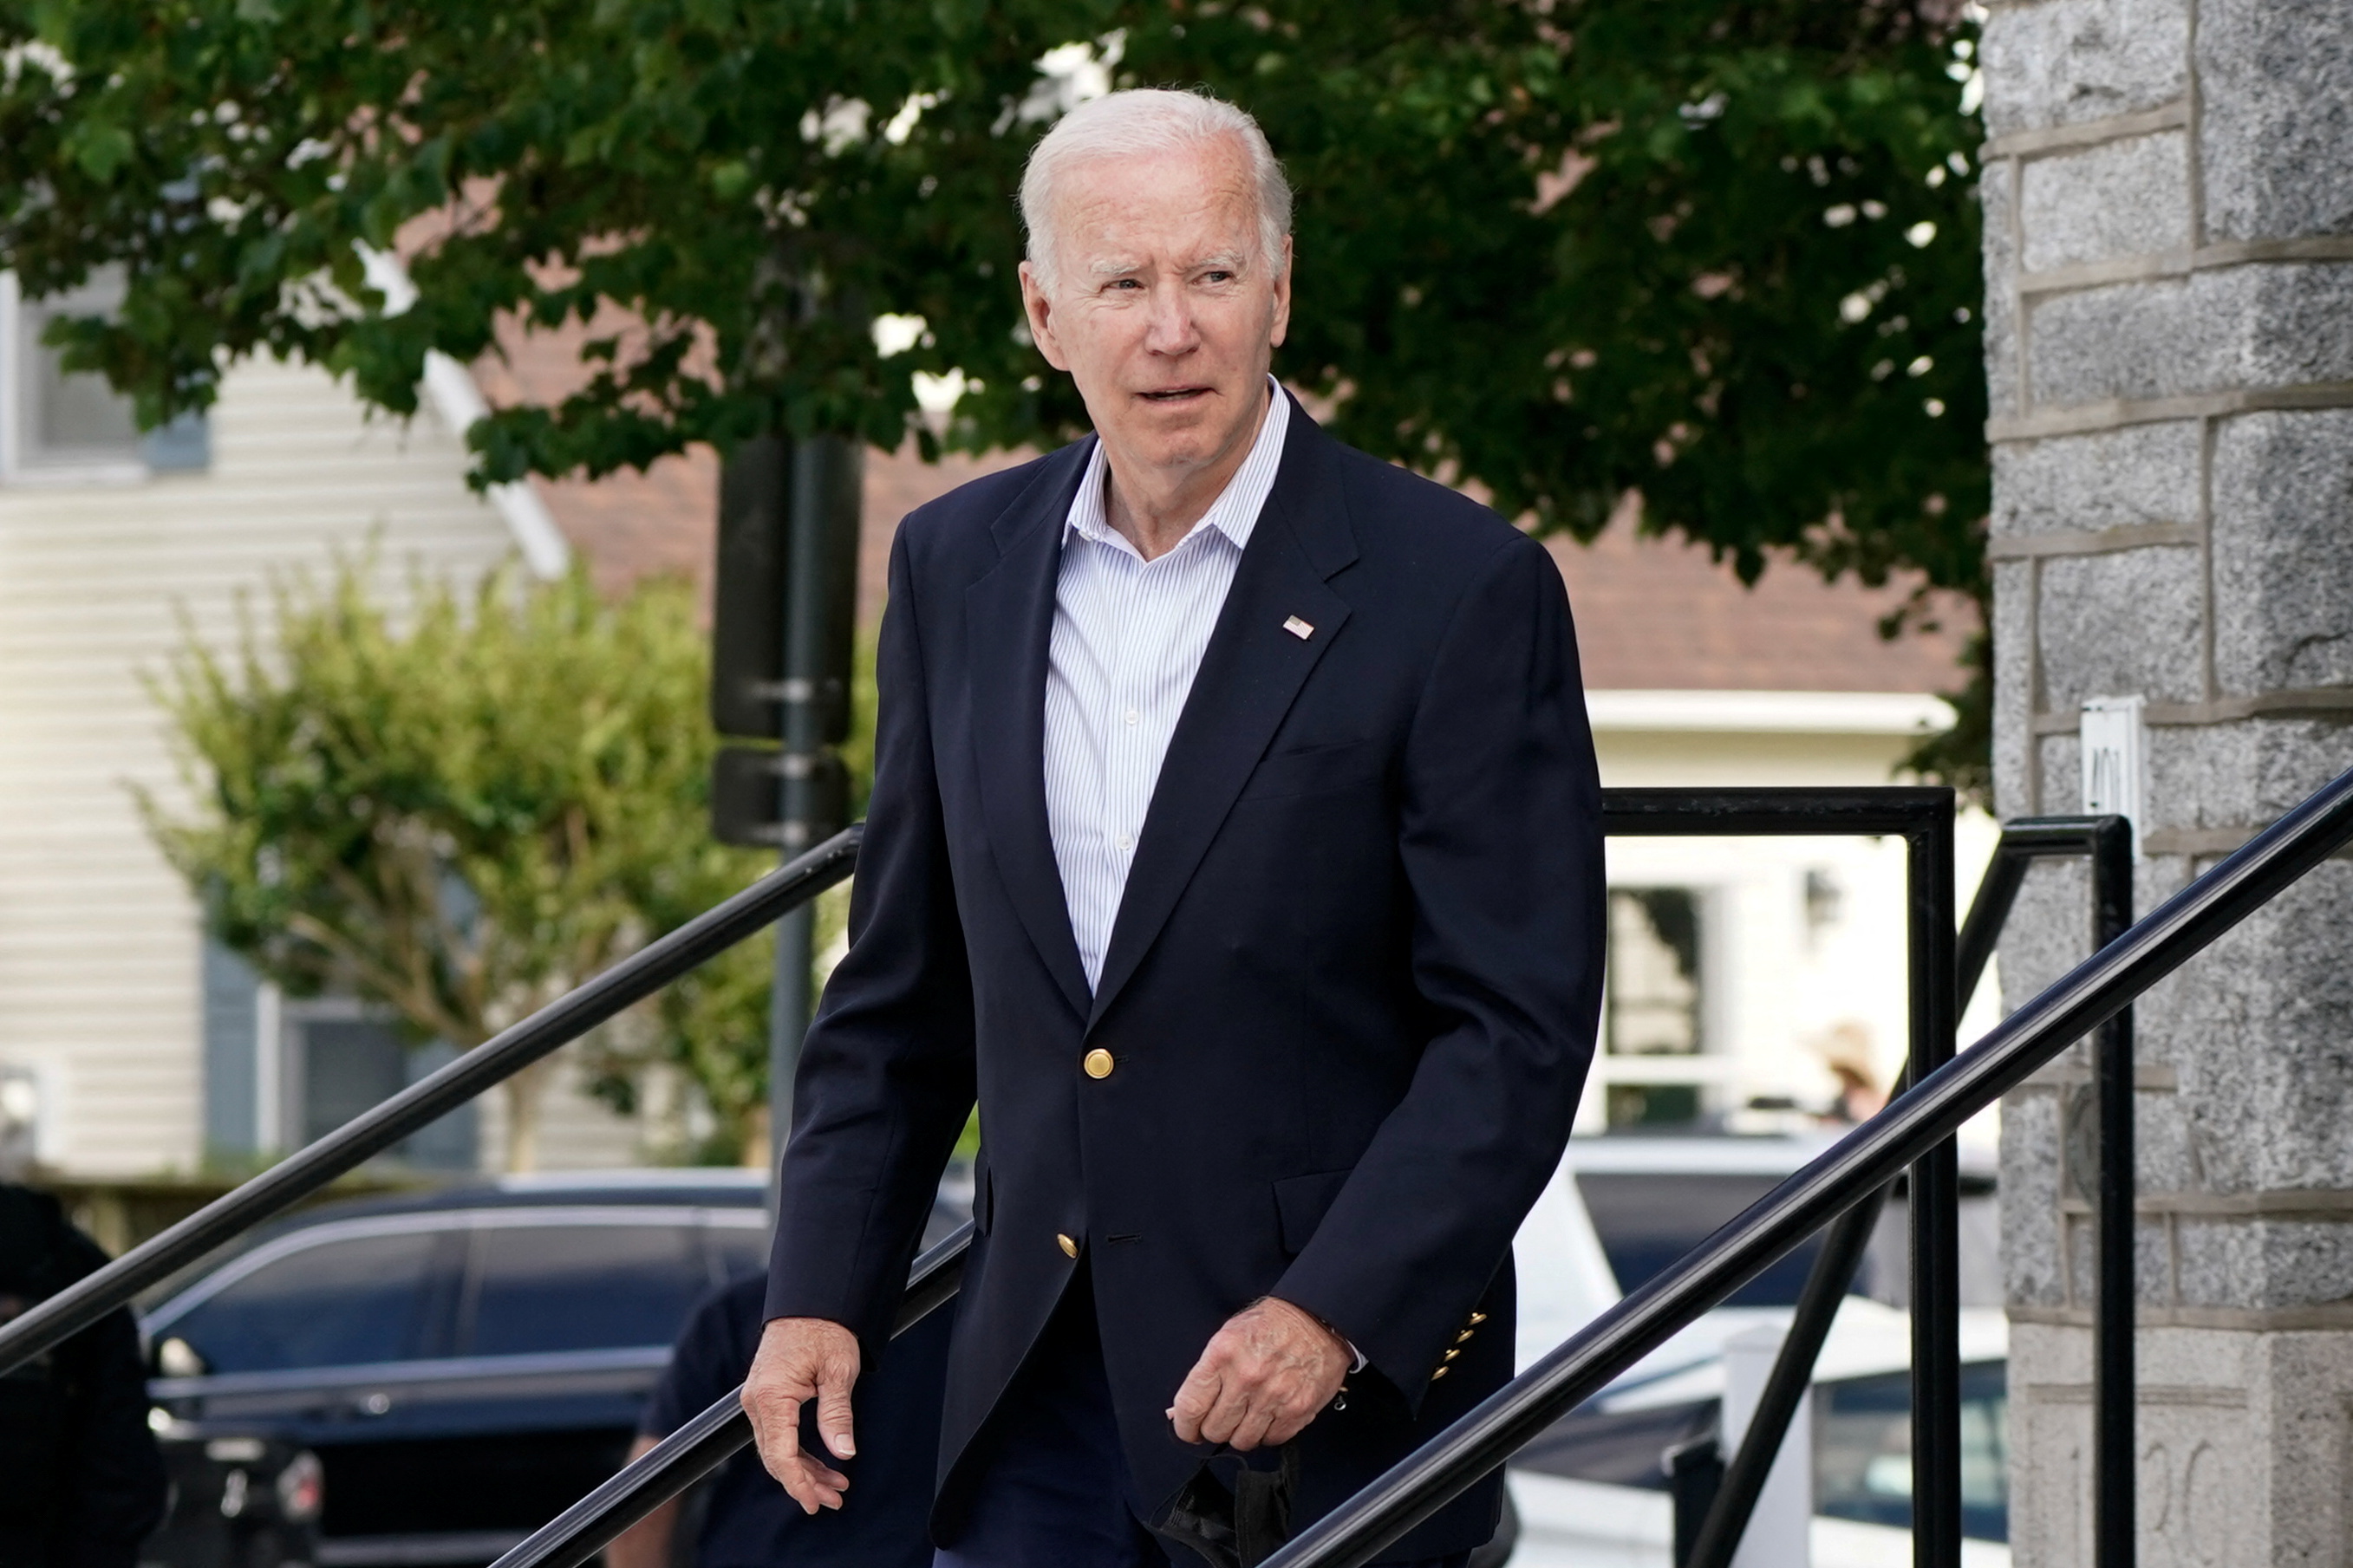 US President Joe Biden called on Congress to suspend the federal gas tax for the next three months and urged states to cut their individual gas taxes as well.